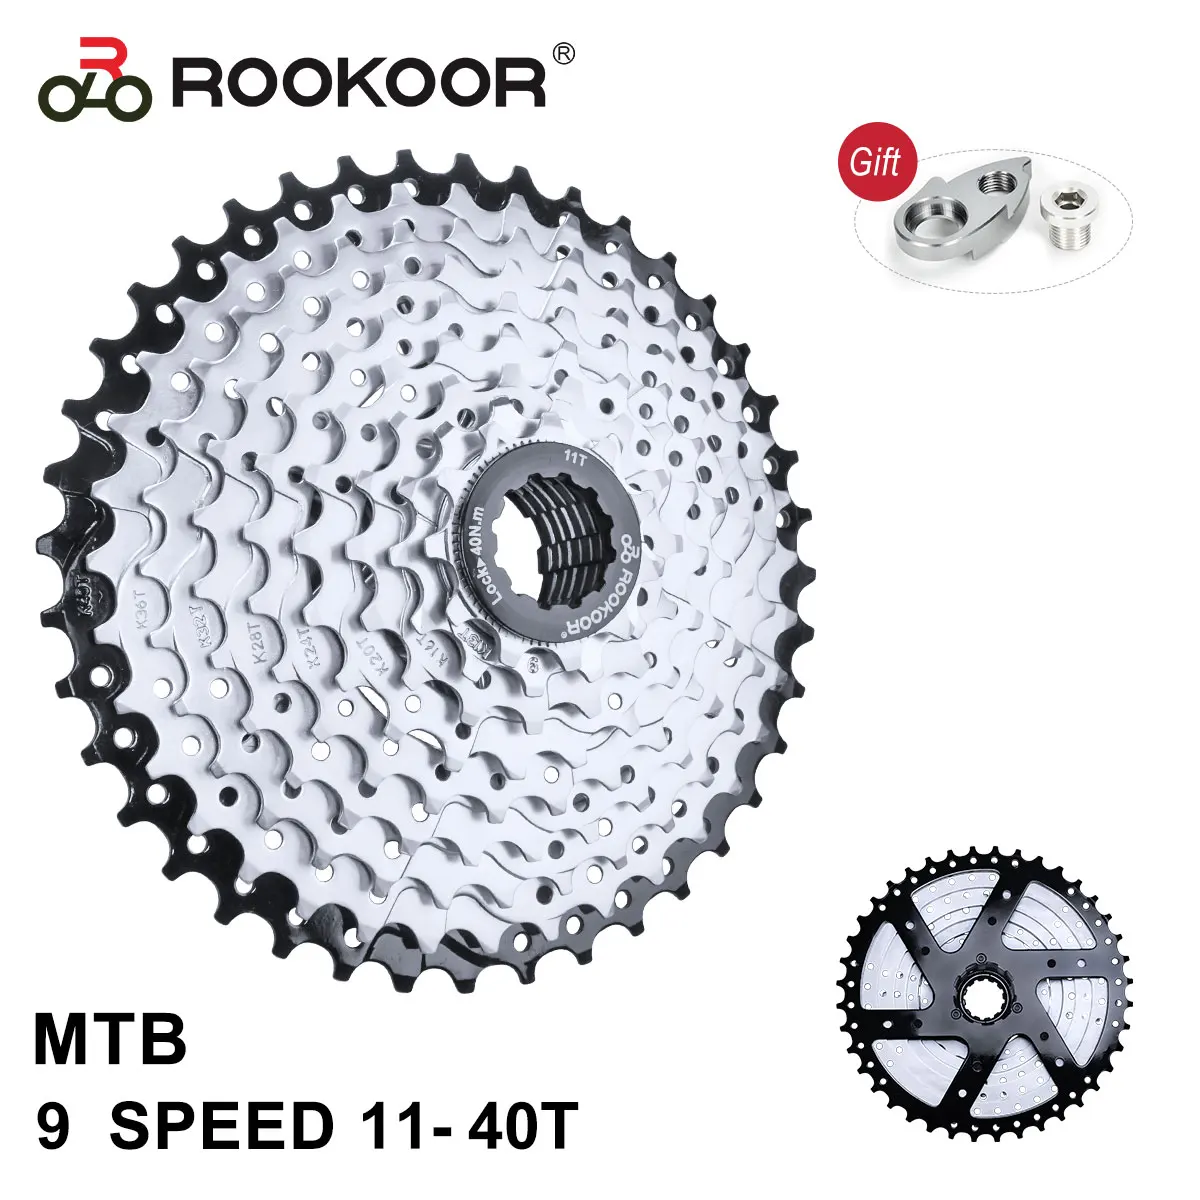 

Rookoor 9 Speed Bicycle Cassette Freewheel MTB Bike Velocidade 11-40T Sprocket Bike Accessories for SHIMANO SRAM Cycling Parts